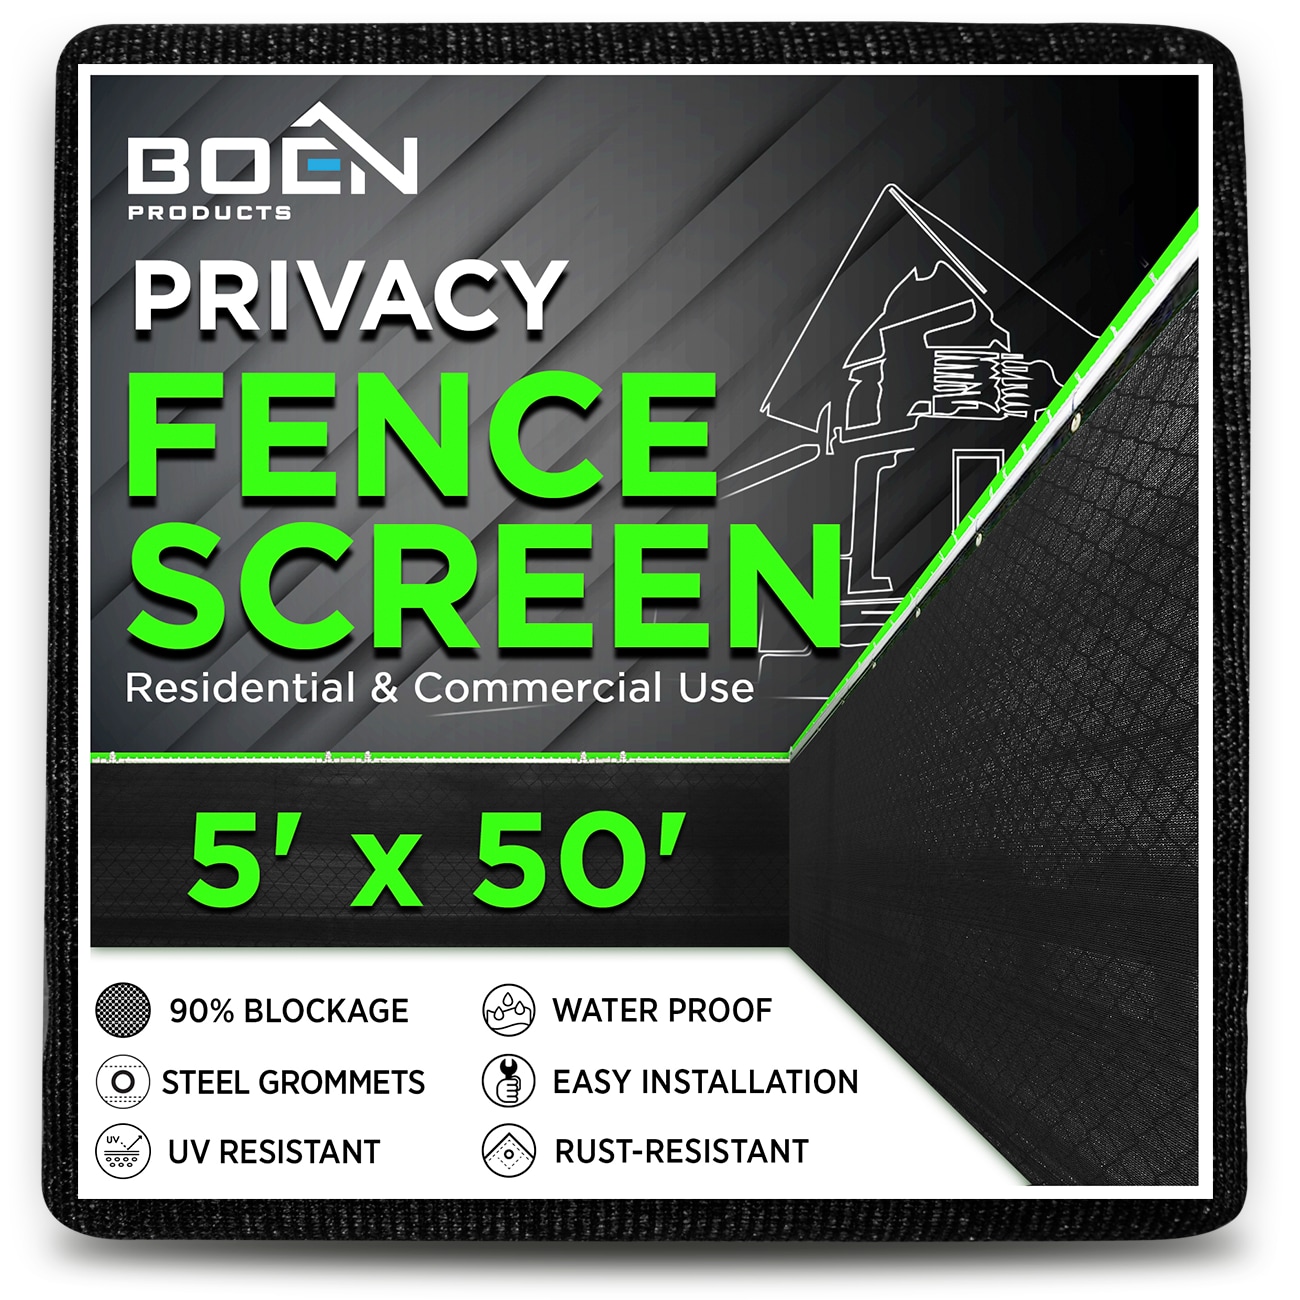 PVC Mesh Fence Privacy Windscreen Fabric - Free Shipping